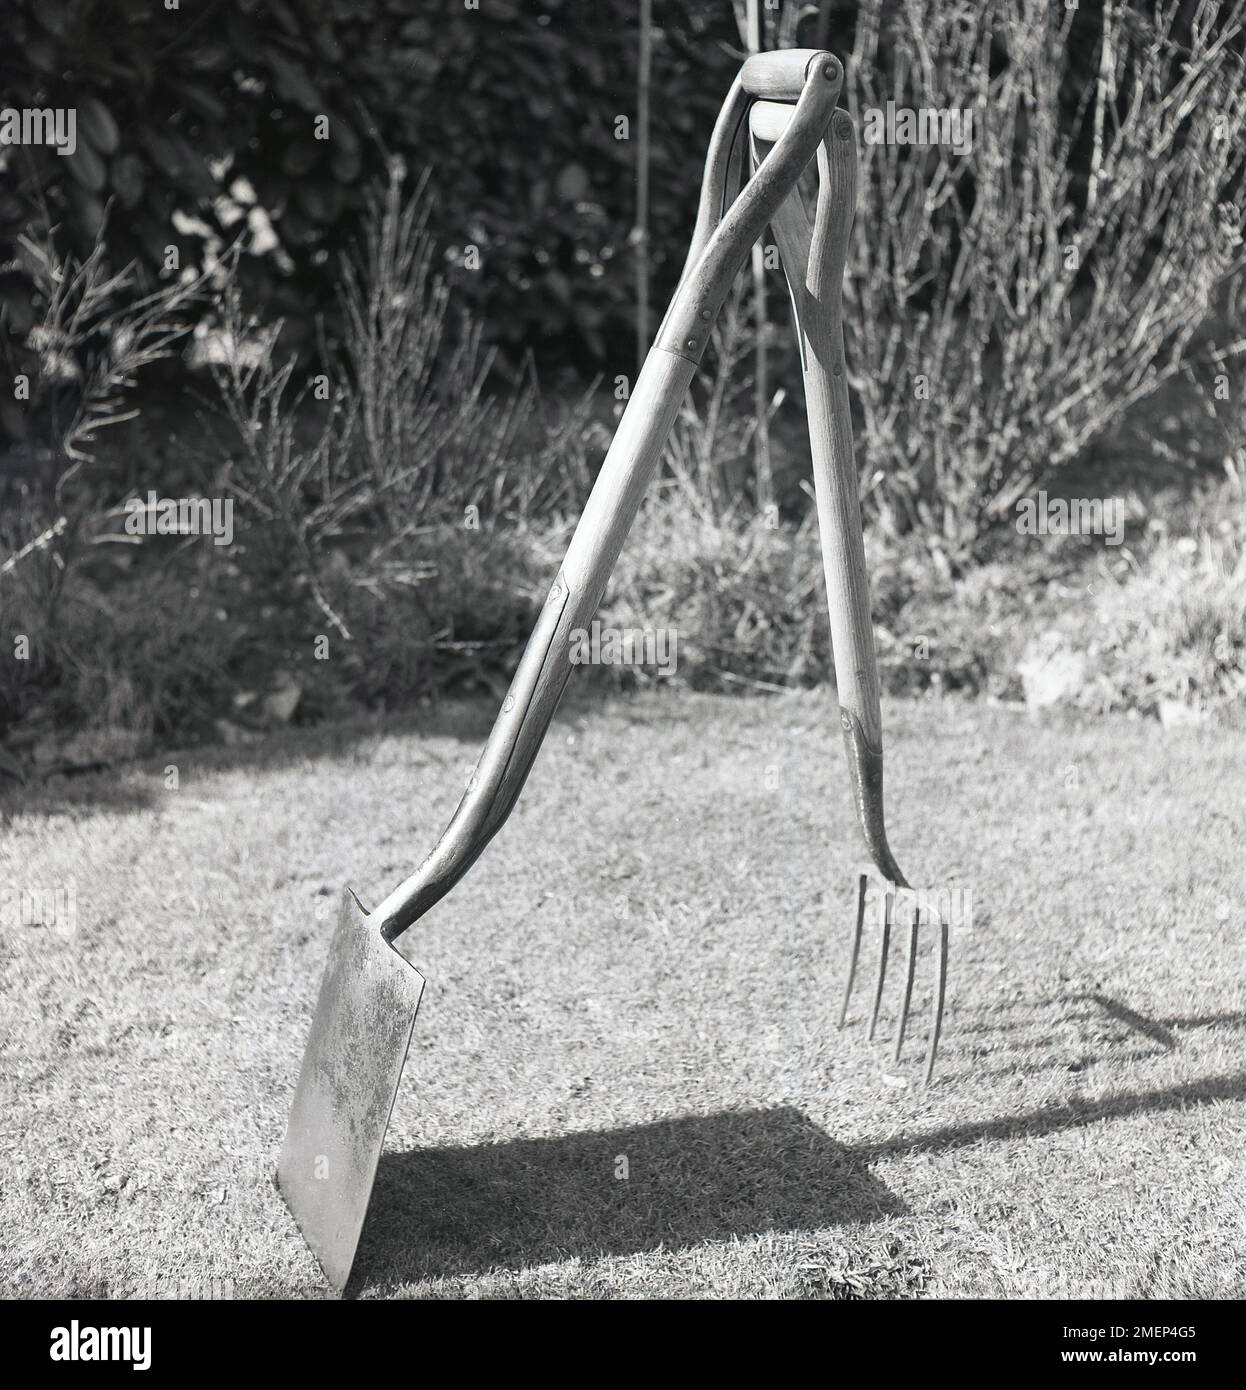 1950s, historical, life balance..., outside on a lawn, a wooden handled garden spade and garden fork balanced against each other. Stock Photo